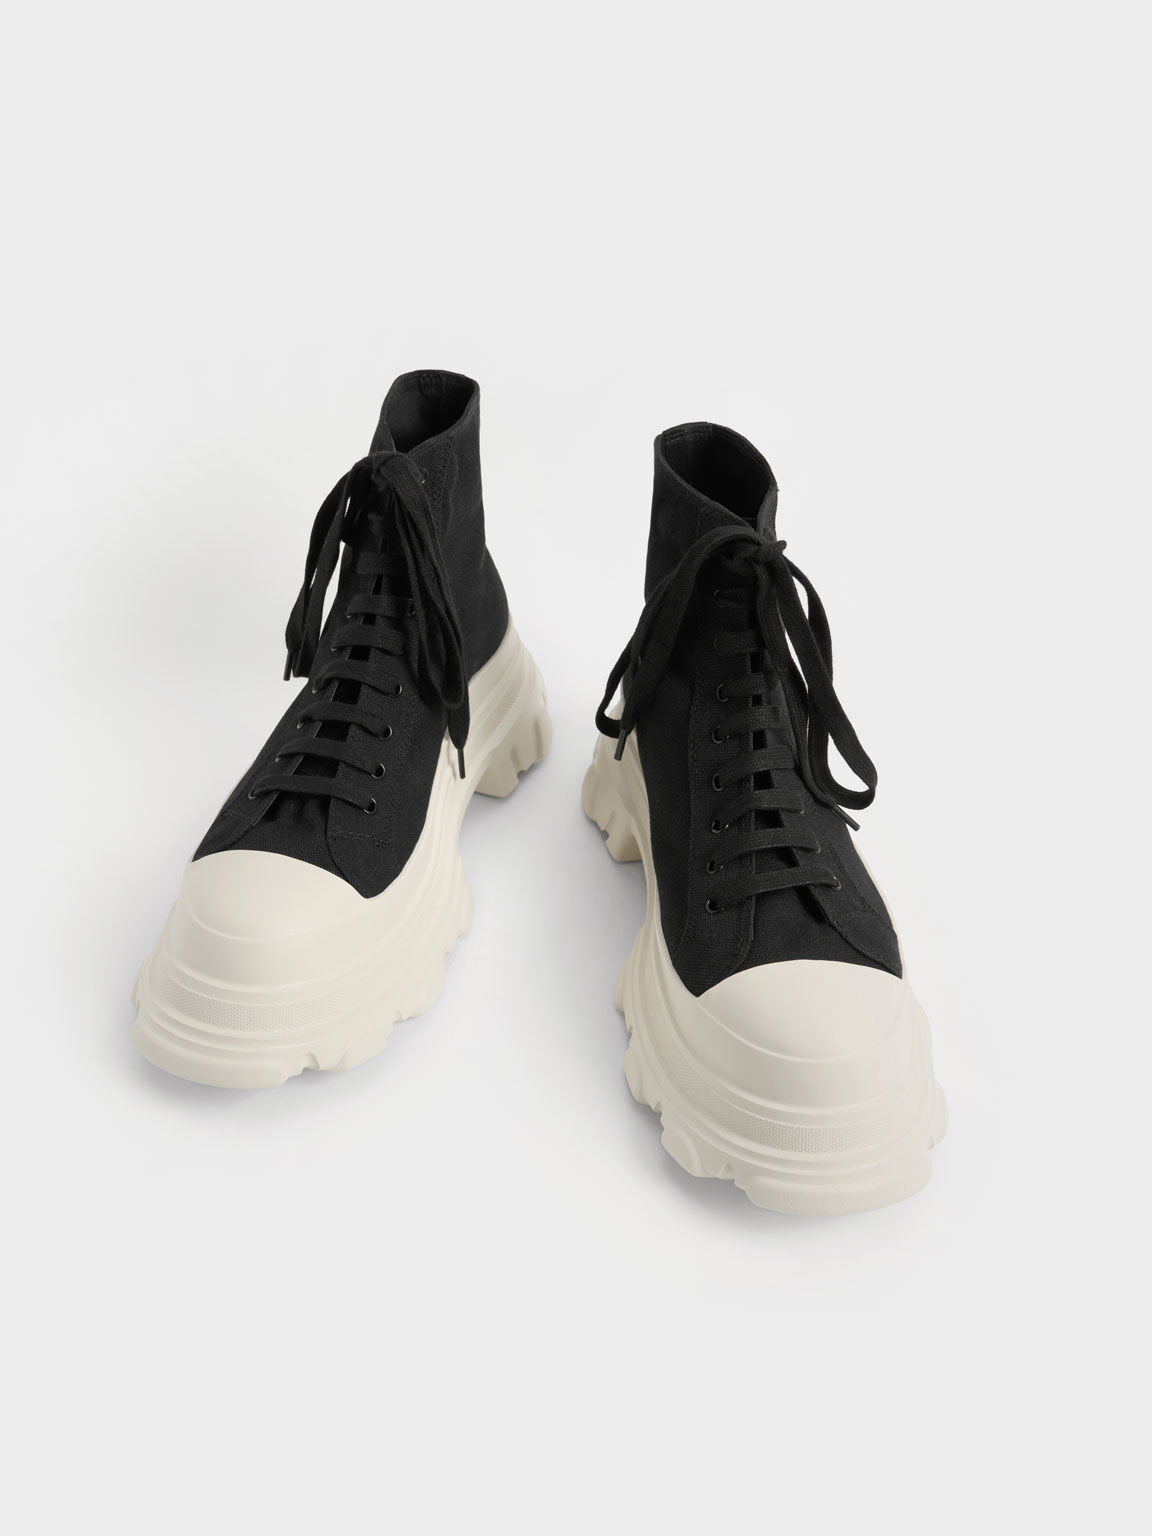 Canvas Chunky High-Top Sneakers, Black Textured, hi-res